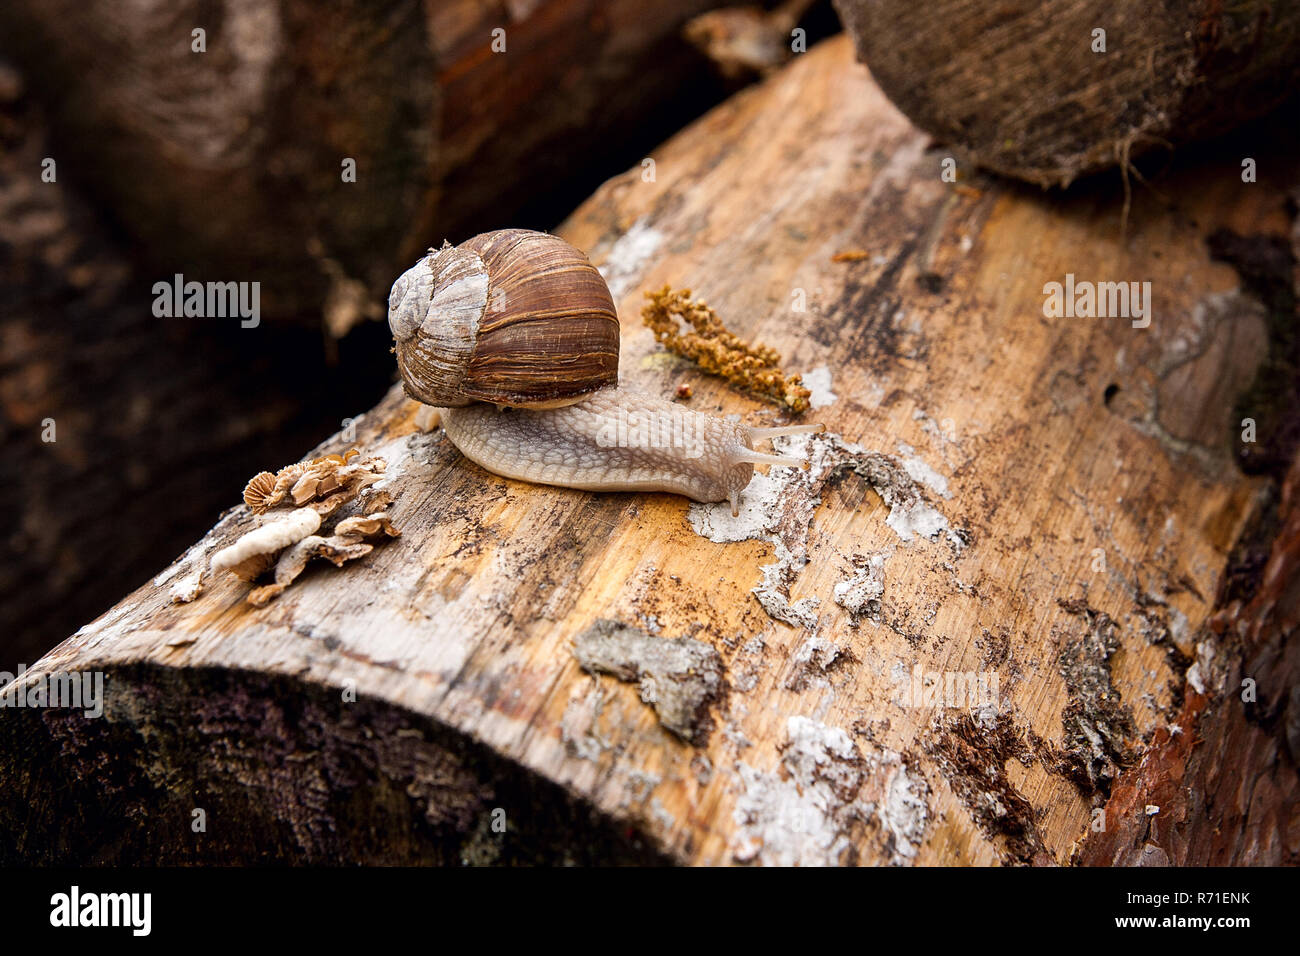 Burgundy snail (Helix pomatia, Roman snail, edible snail, escargot) crawling on its road. Close up view of big snail on the trunk of old tree. Mold gr Stock Photo